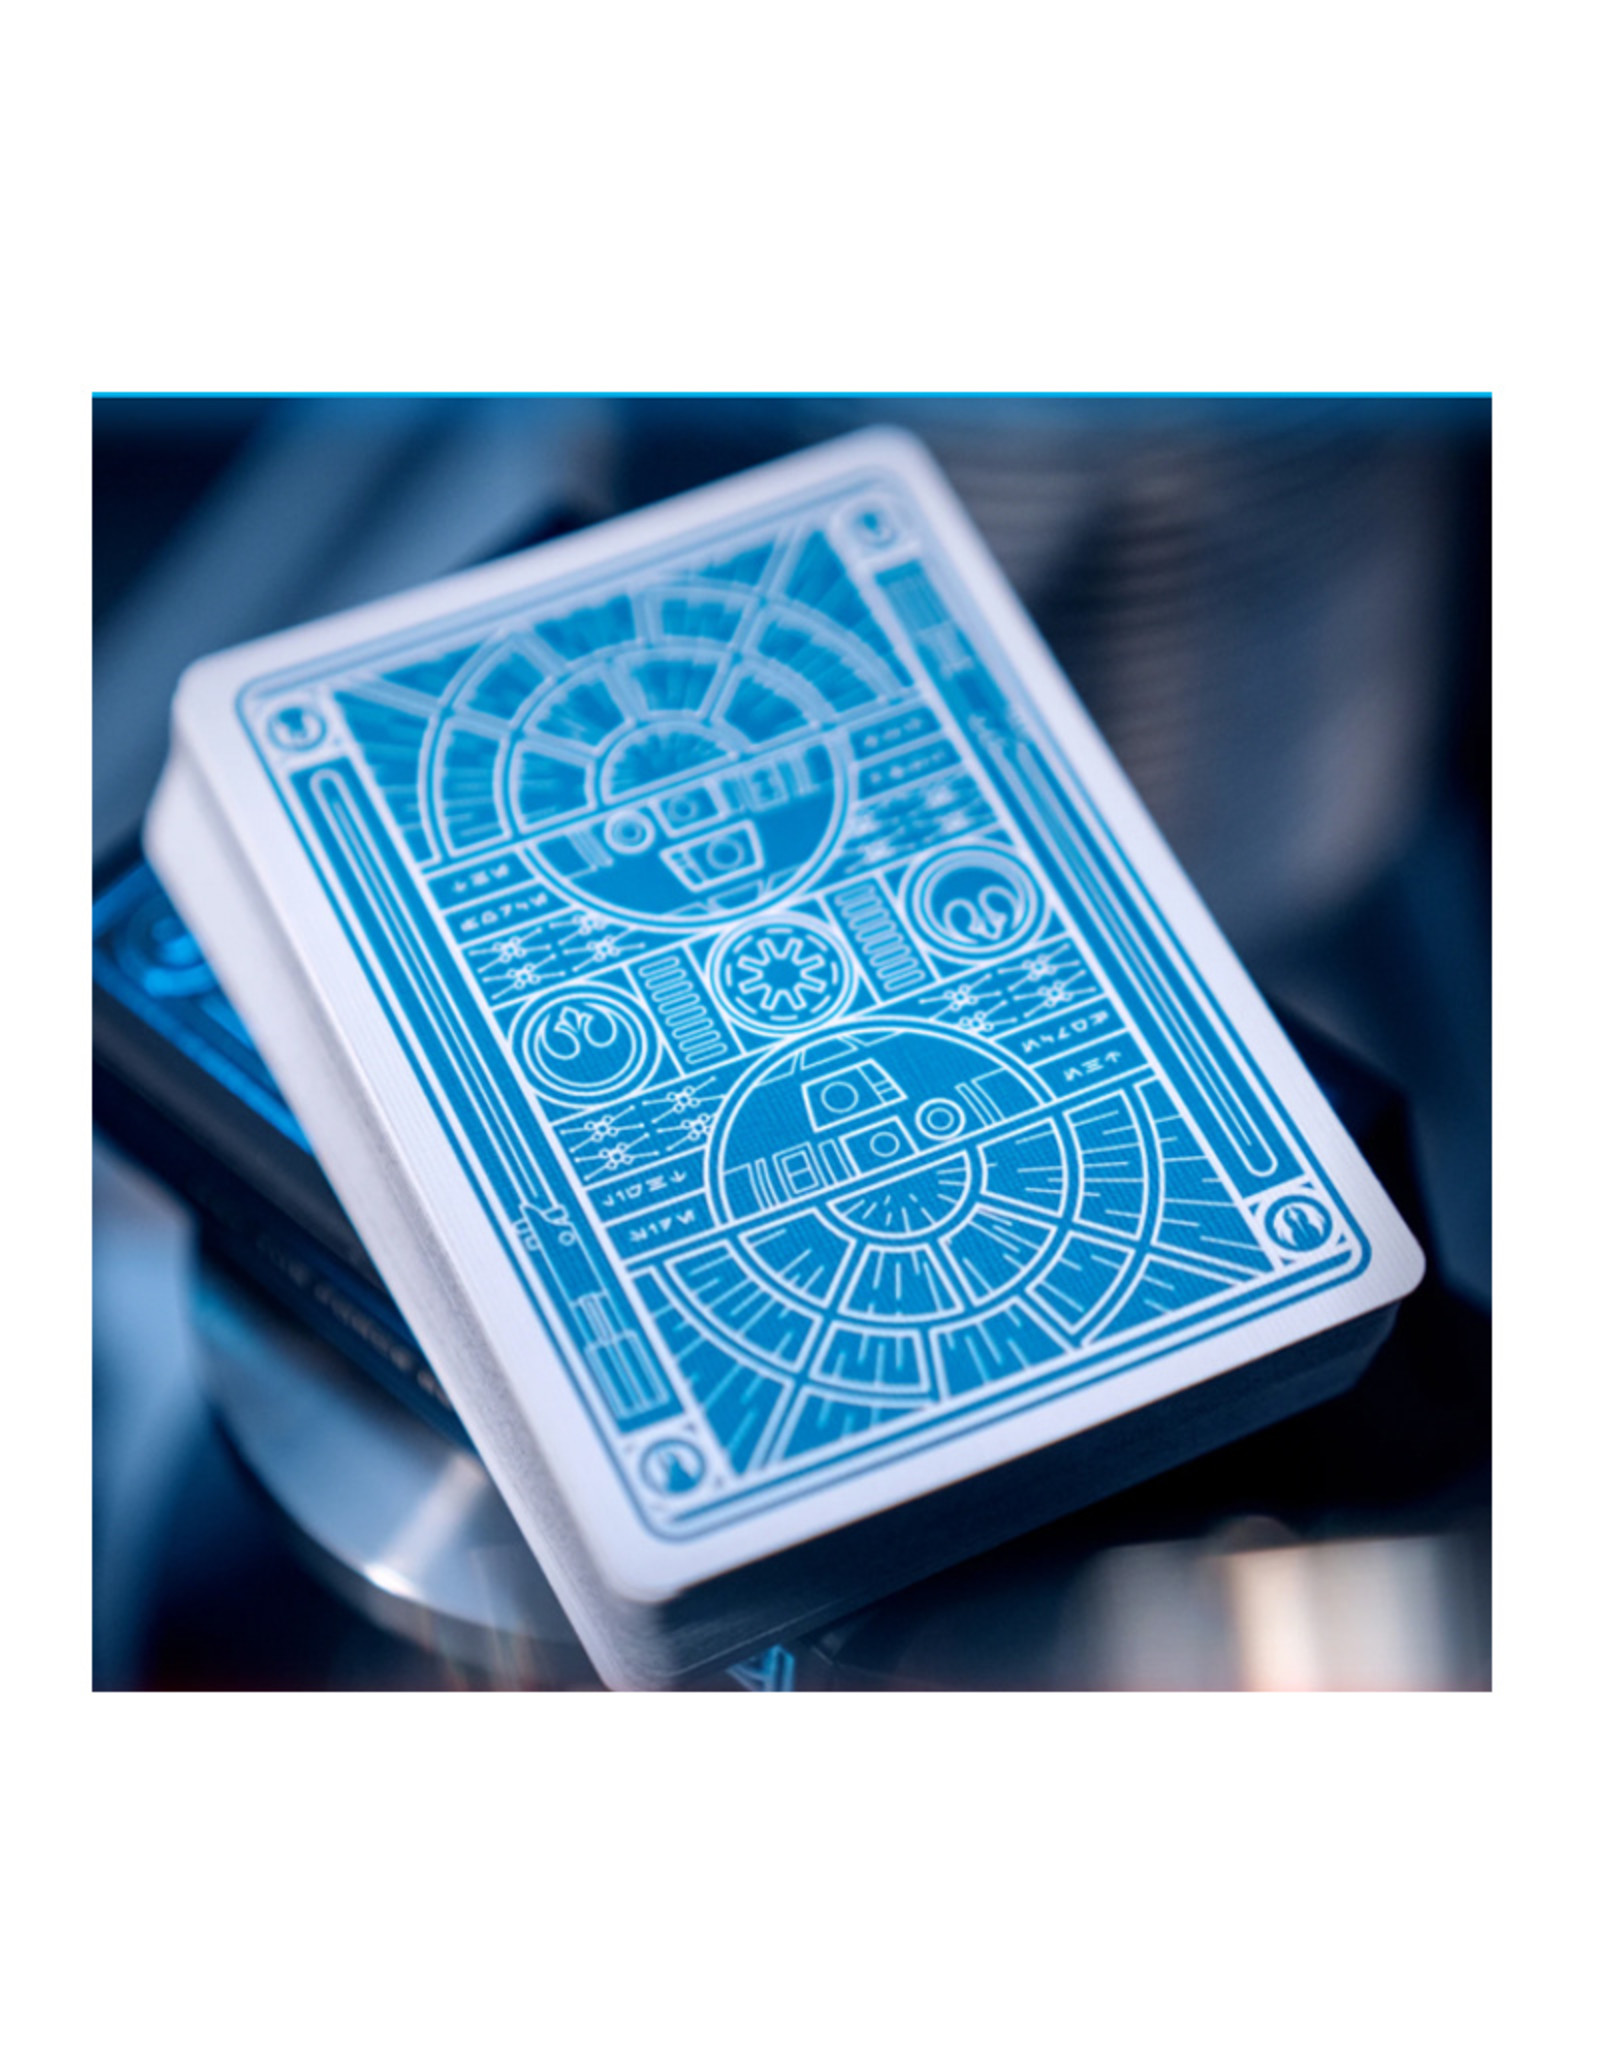 Theory Eleven Star Wars Light Side (Blue) Playing Cards